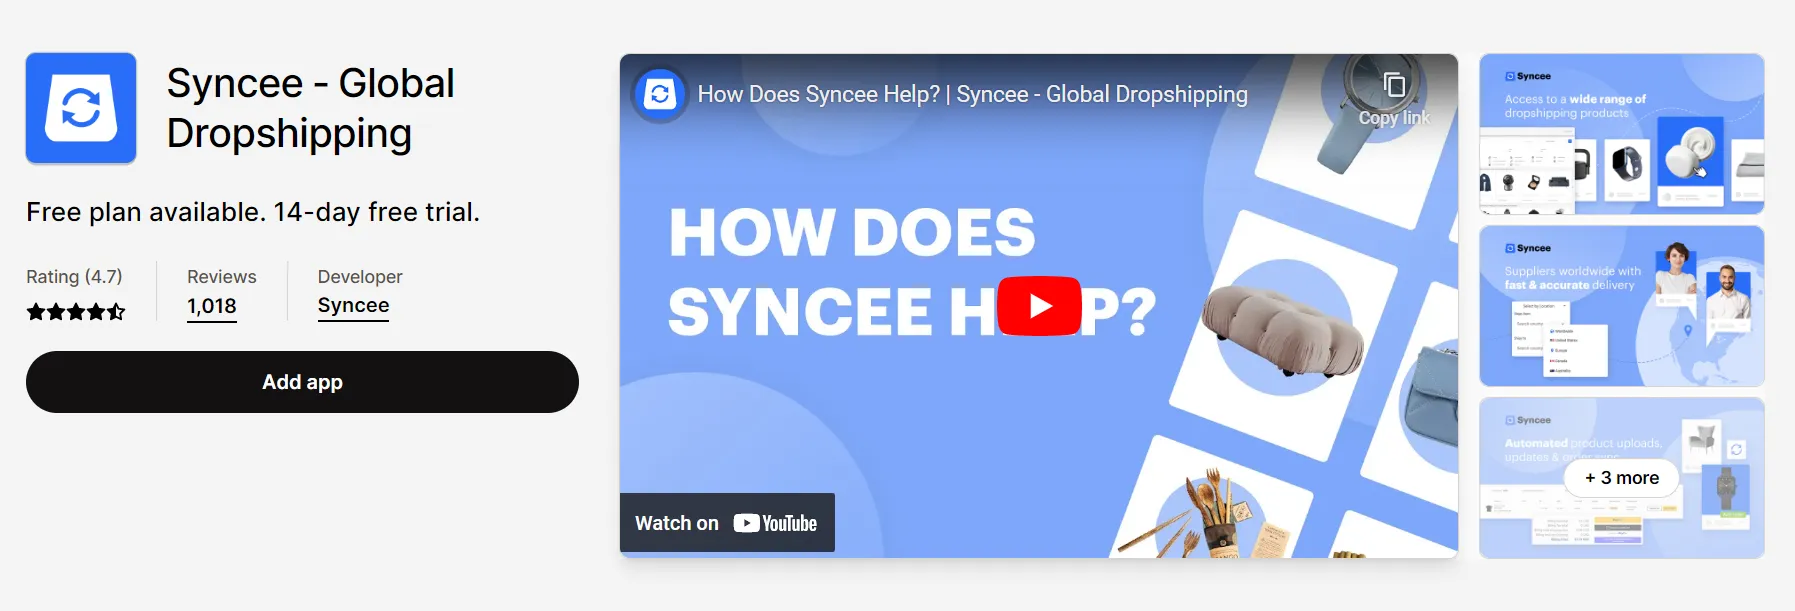 Syncee Dropshipping app for Shopify